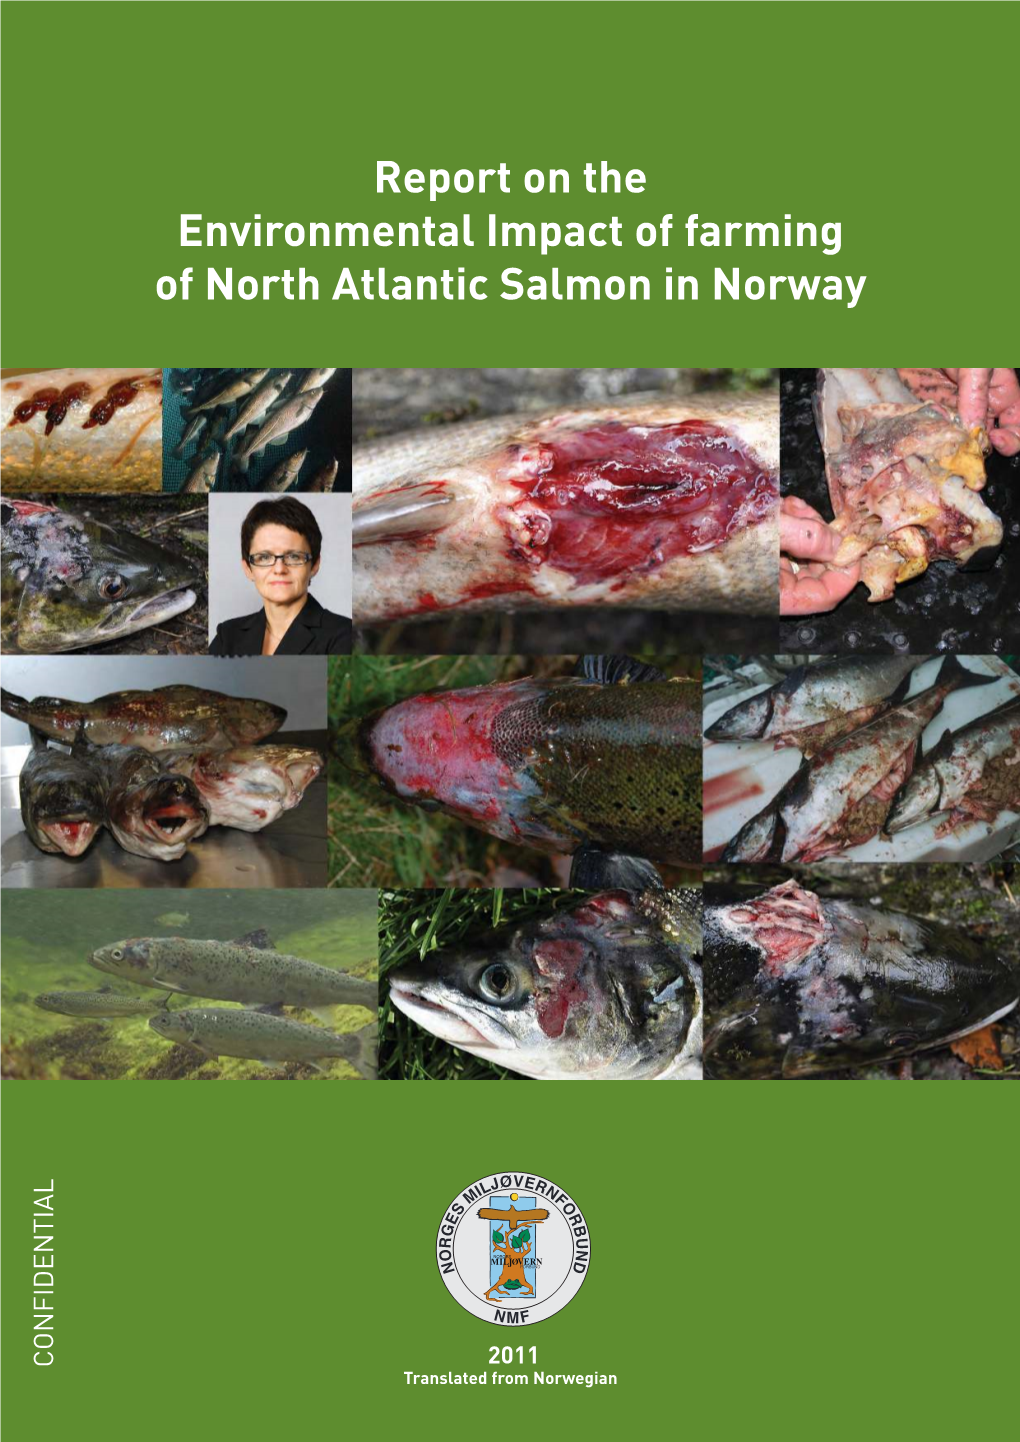 Report on the Environmental Impact of Farming of North Atlantic Salmon in Norway